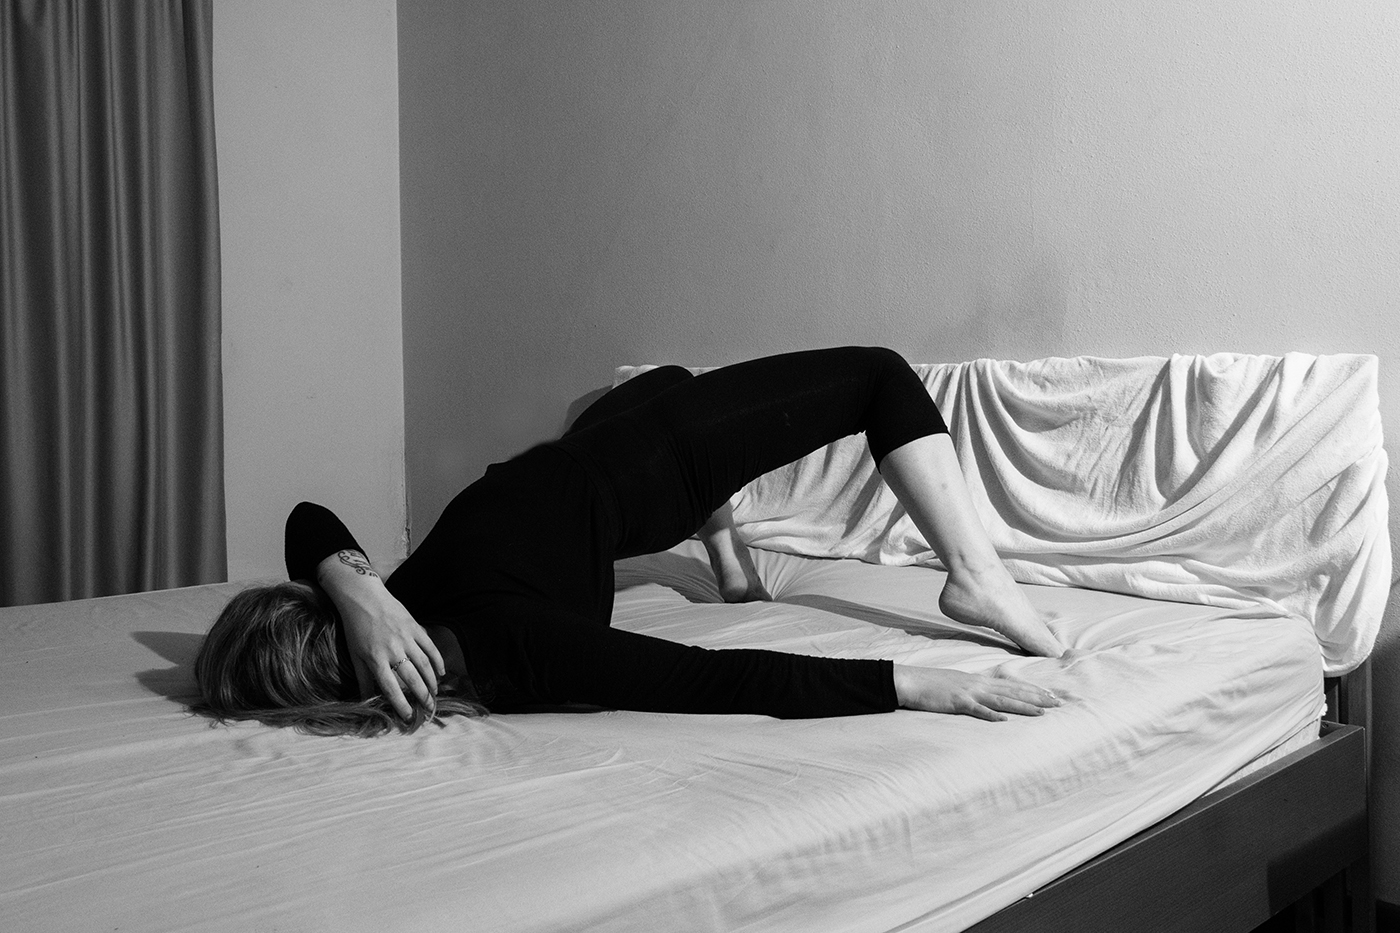 Blow Photo Fuse. Image: Roisin White, Lay Her Down Upon Her Back